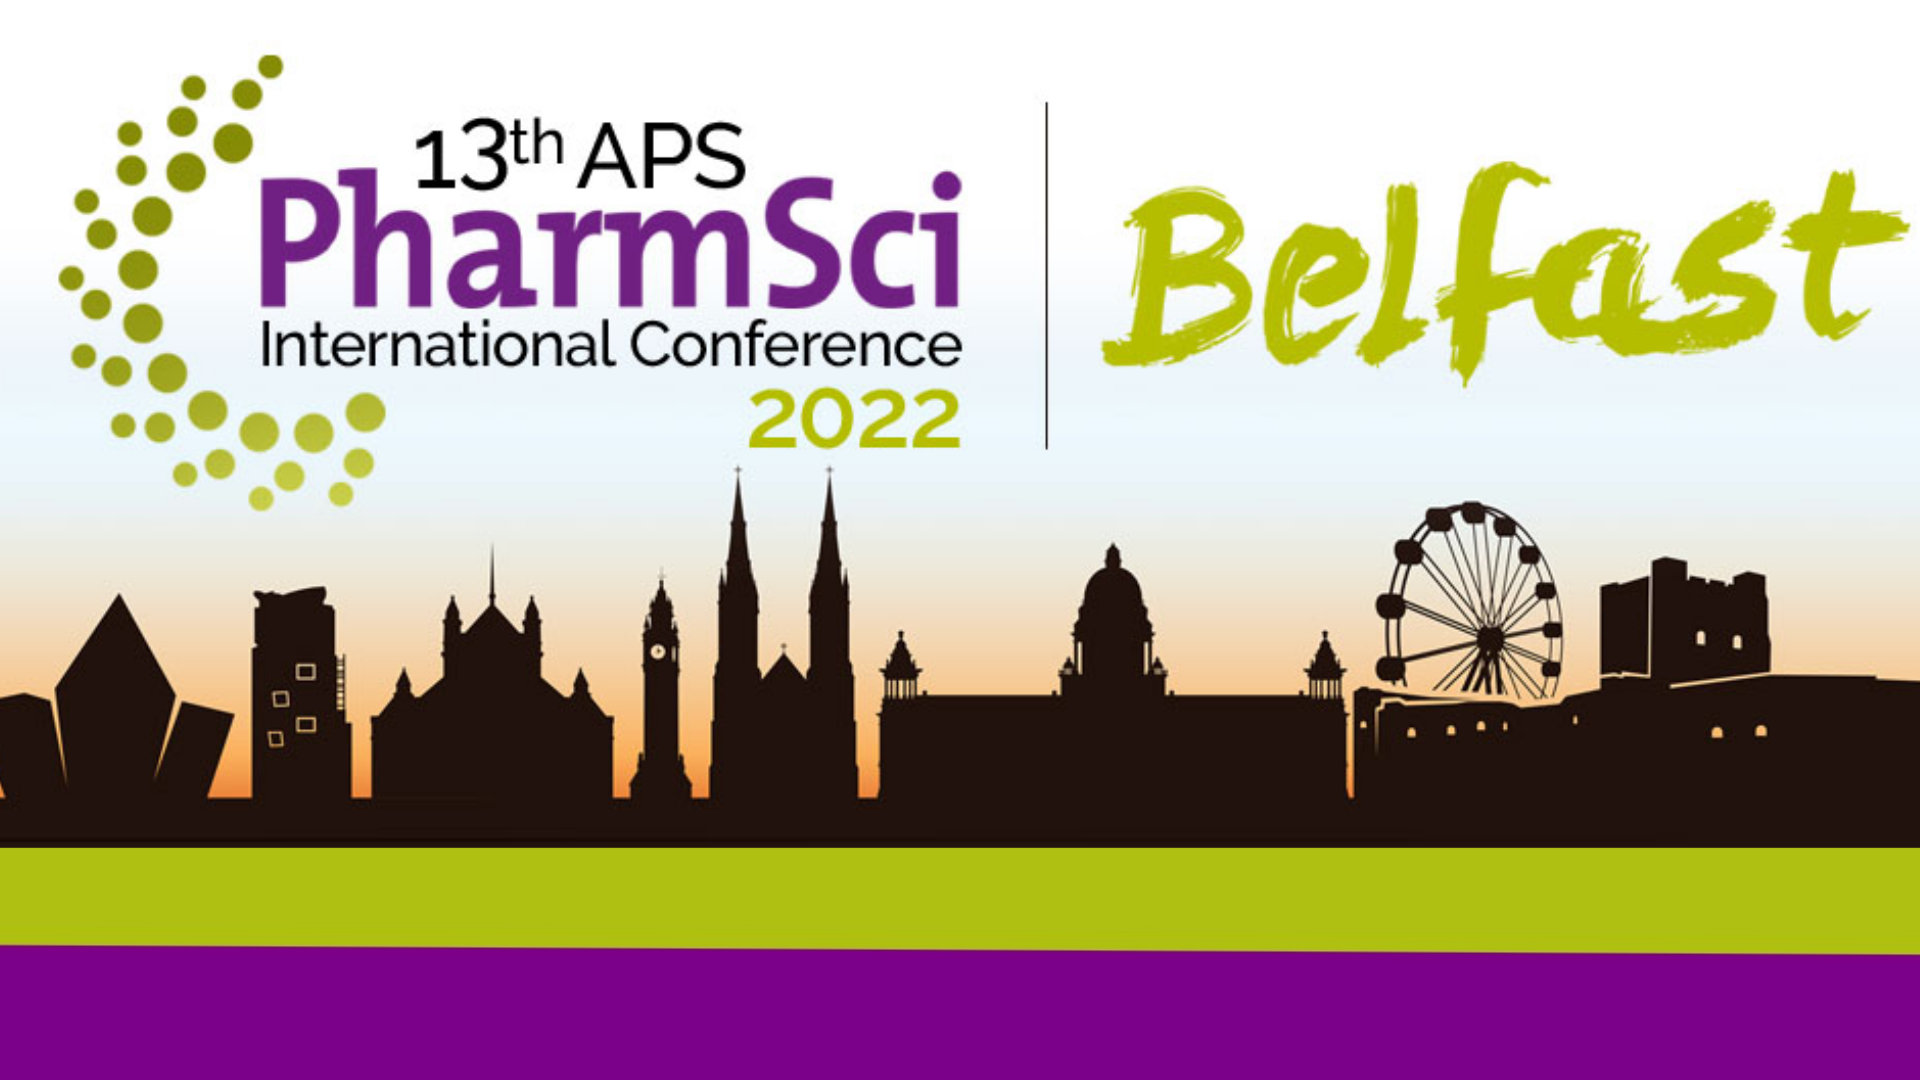 APS 2022 PharmSci Conference in Belfast